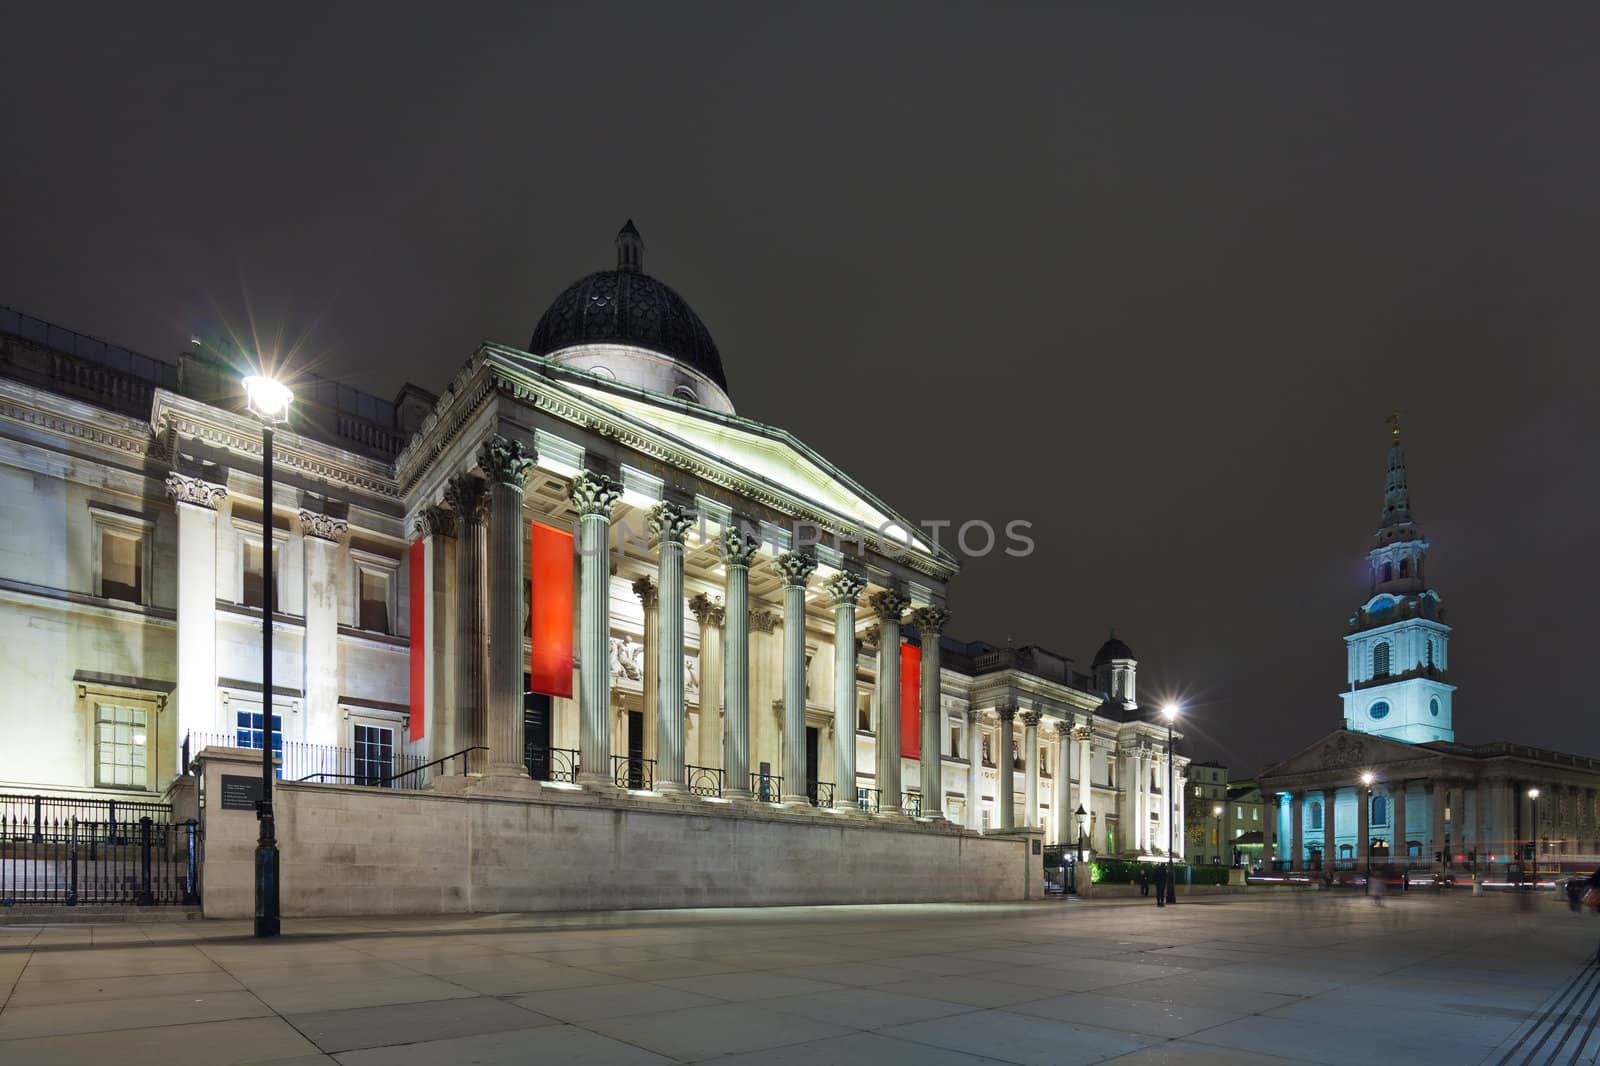 The National Gallery and St Martin's-in-the-Fie lds Church, Lond by Antartis